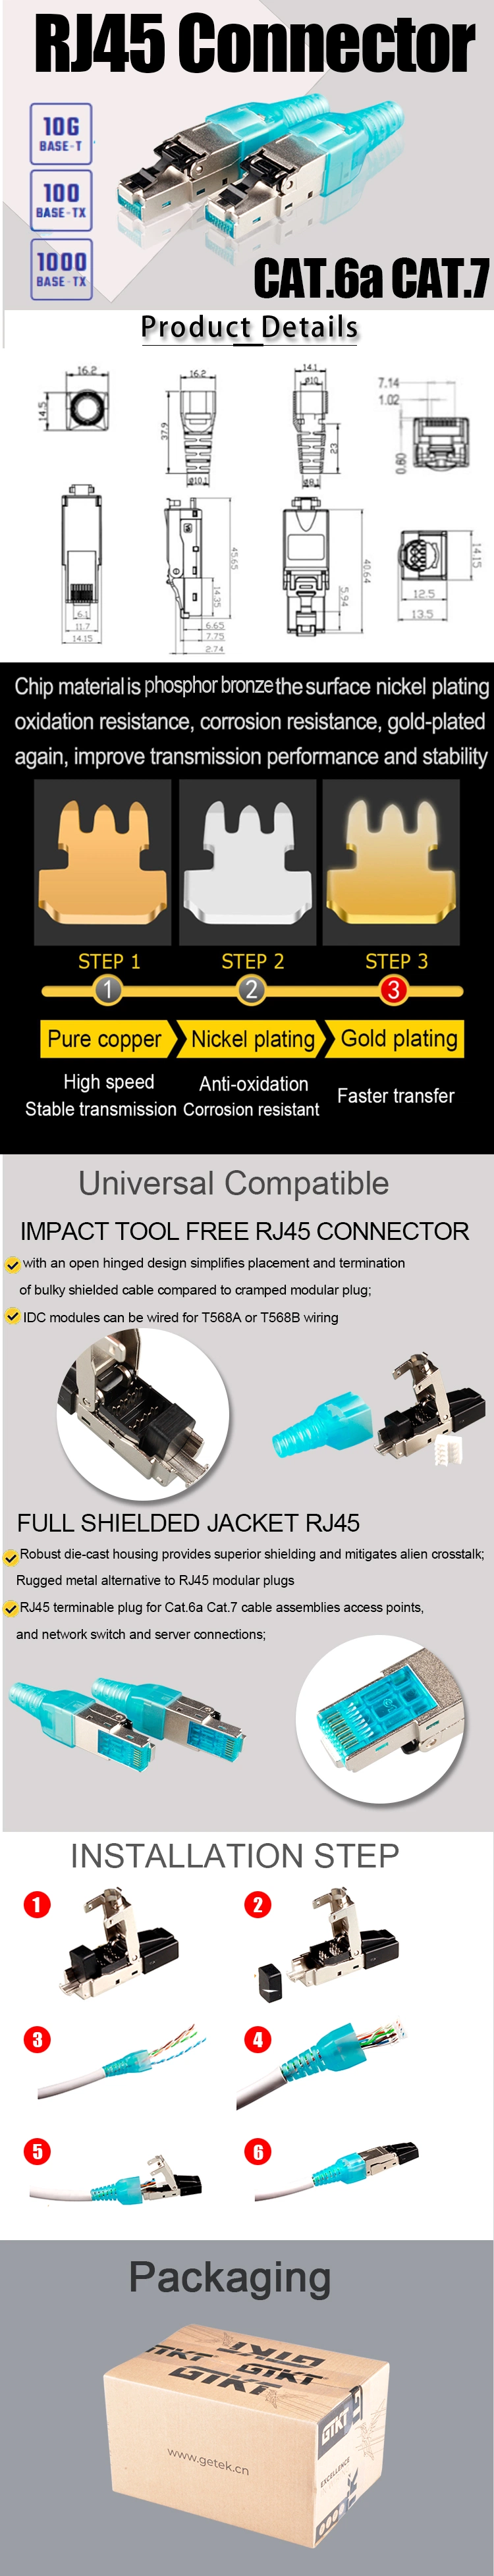 Gcabling RJ45 CAT6 CAT6A Toolless Shield Networking Connector CAT6 CAT6A Cat7 Toolless FTP 8p8c Ethernet Plug